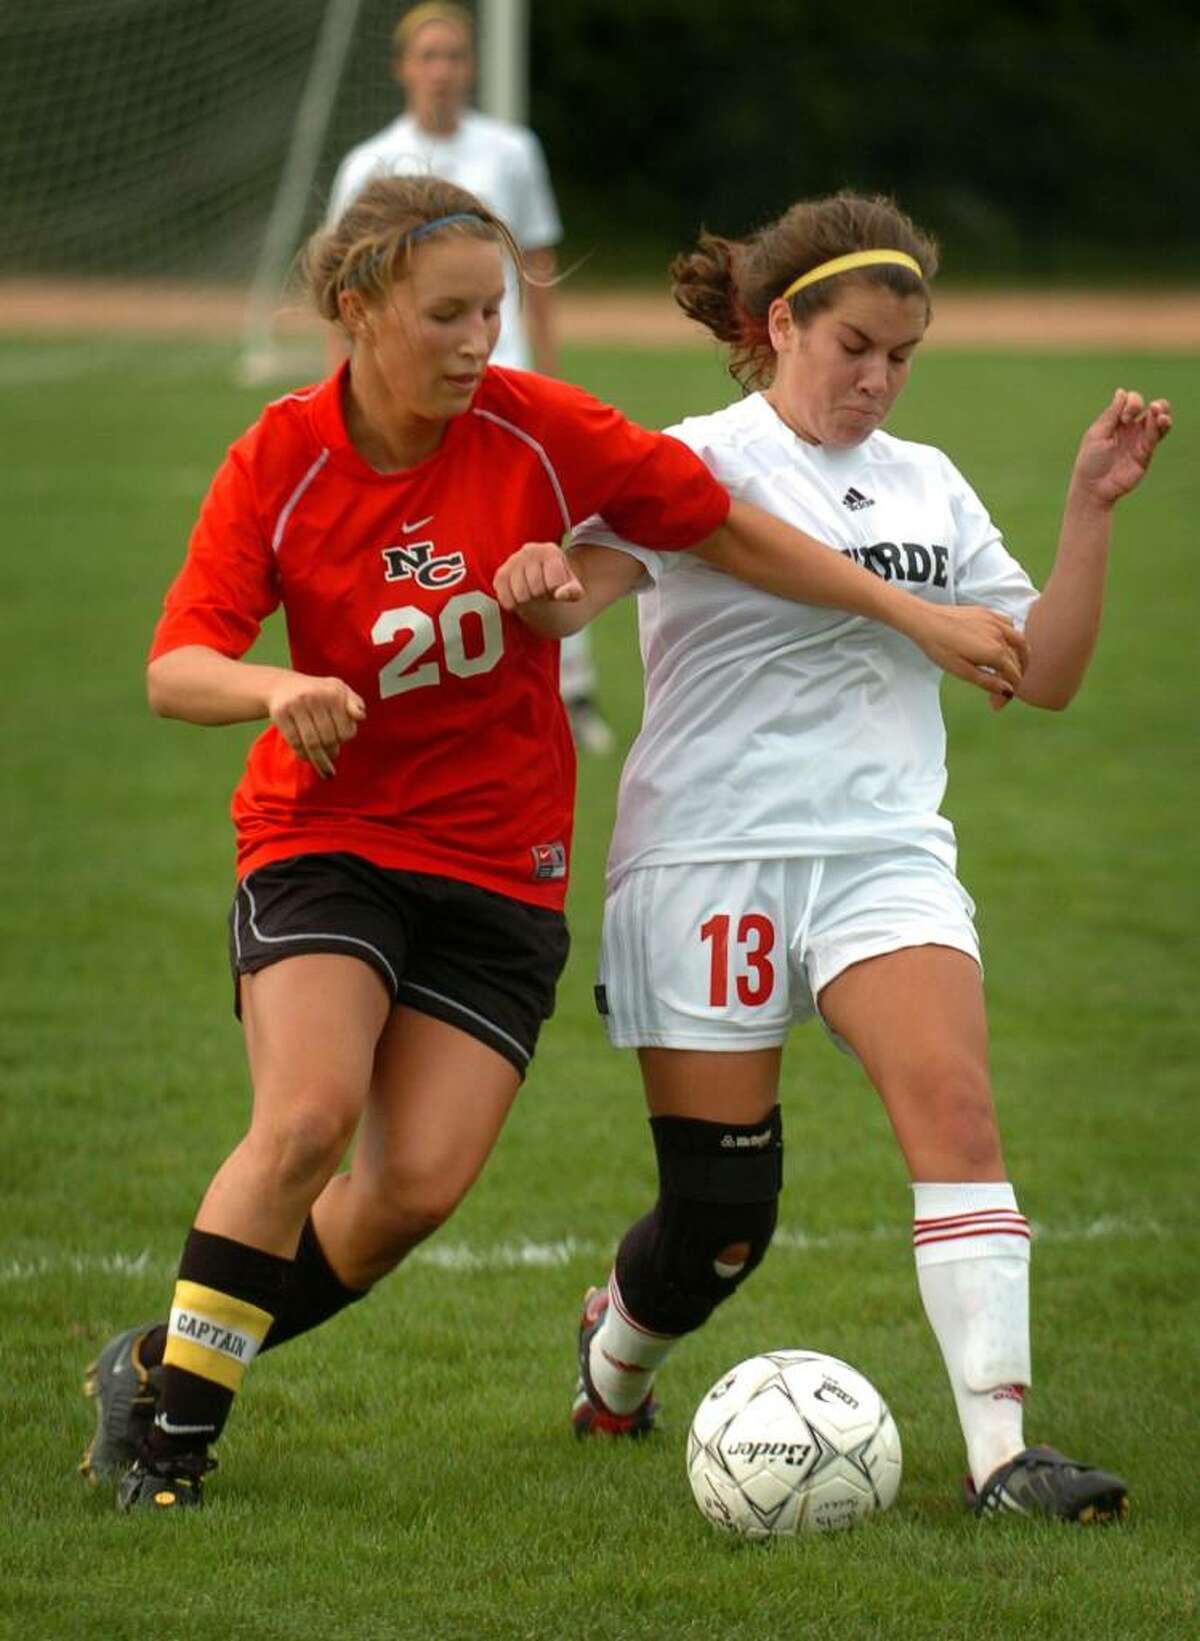 New Canaan's Clare Ashforth, left, battles for the ball with Fairfield Warde's Hannah McGrath during their FCIAC matchup at Warde High School in Fairfield, Conn. on Wednesday, September 30, 2009.